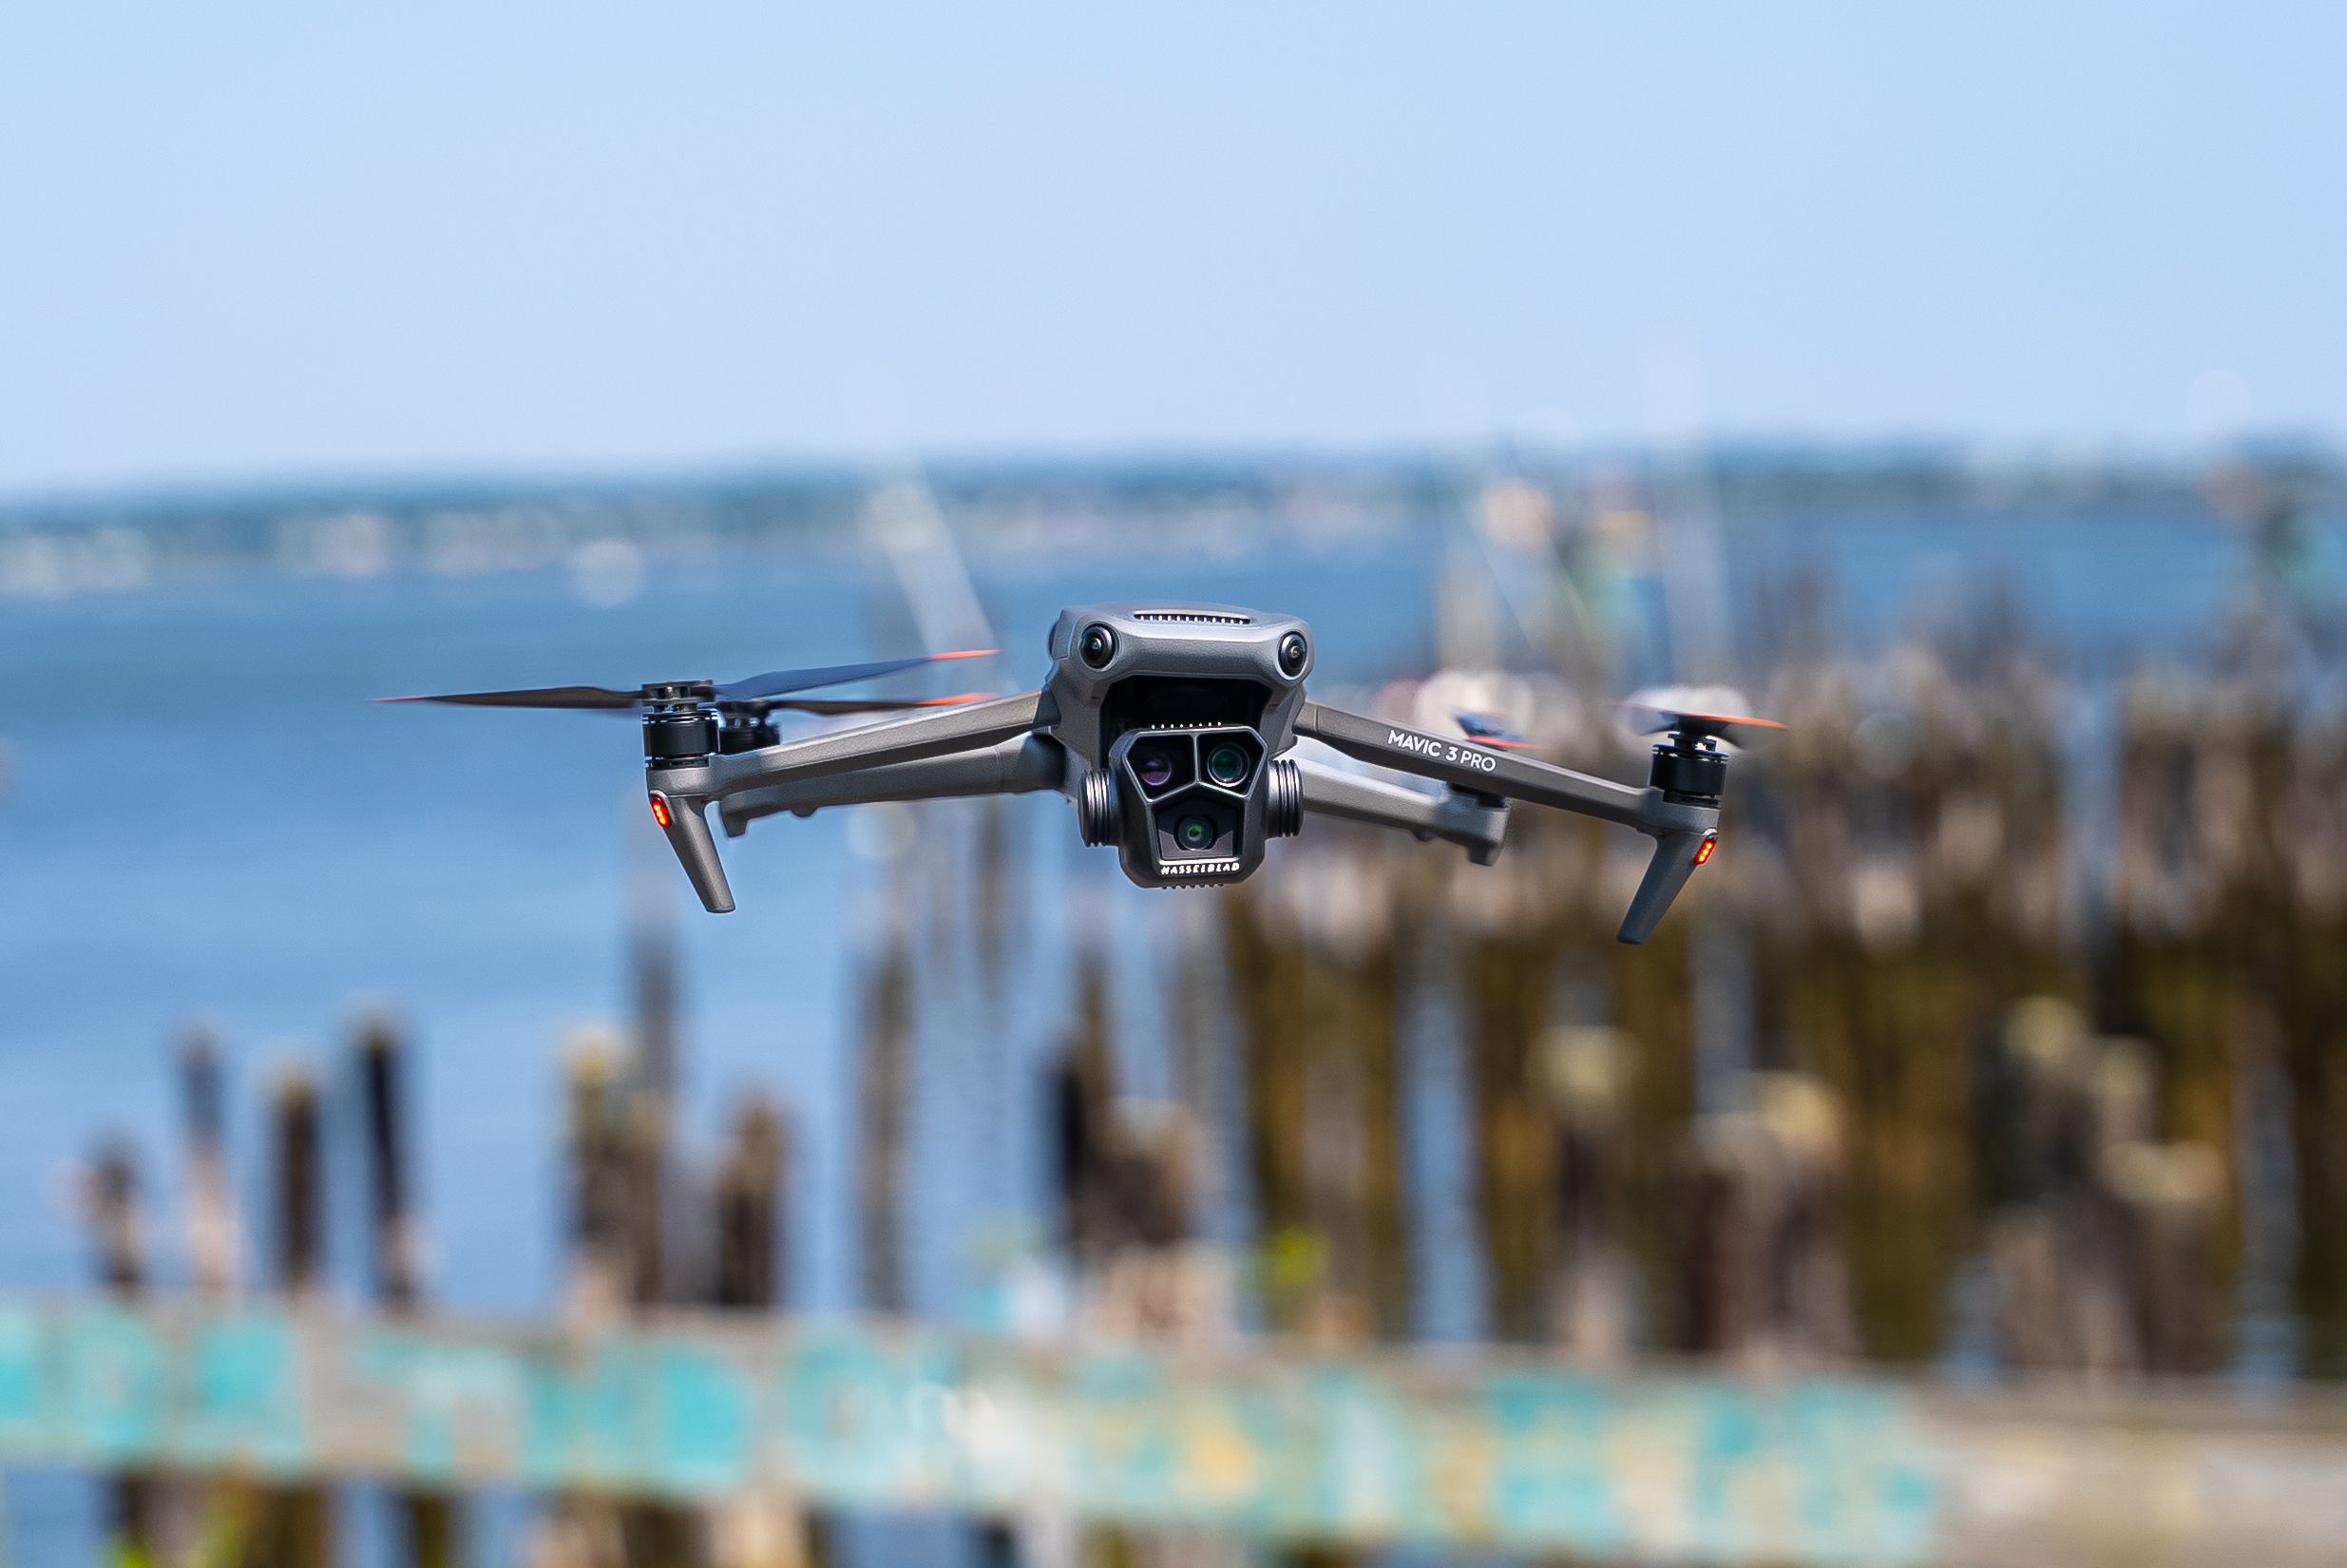 DJI Air 3 Review - The King of Versatility with Two Usable Focal